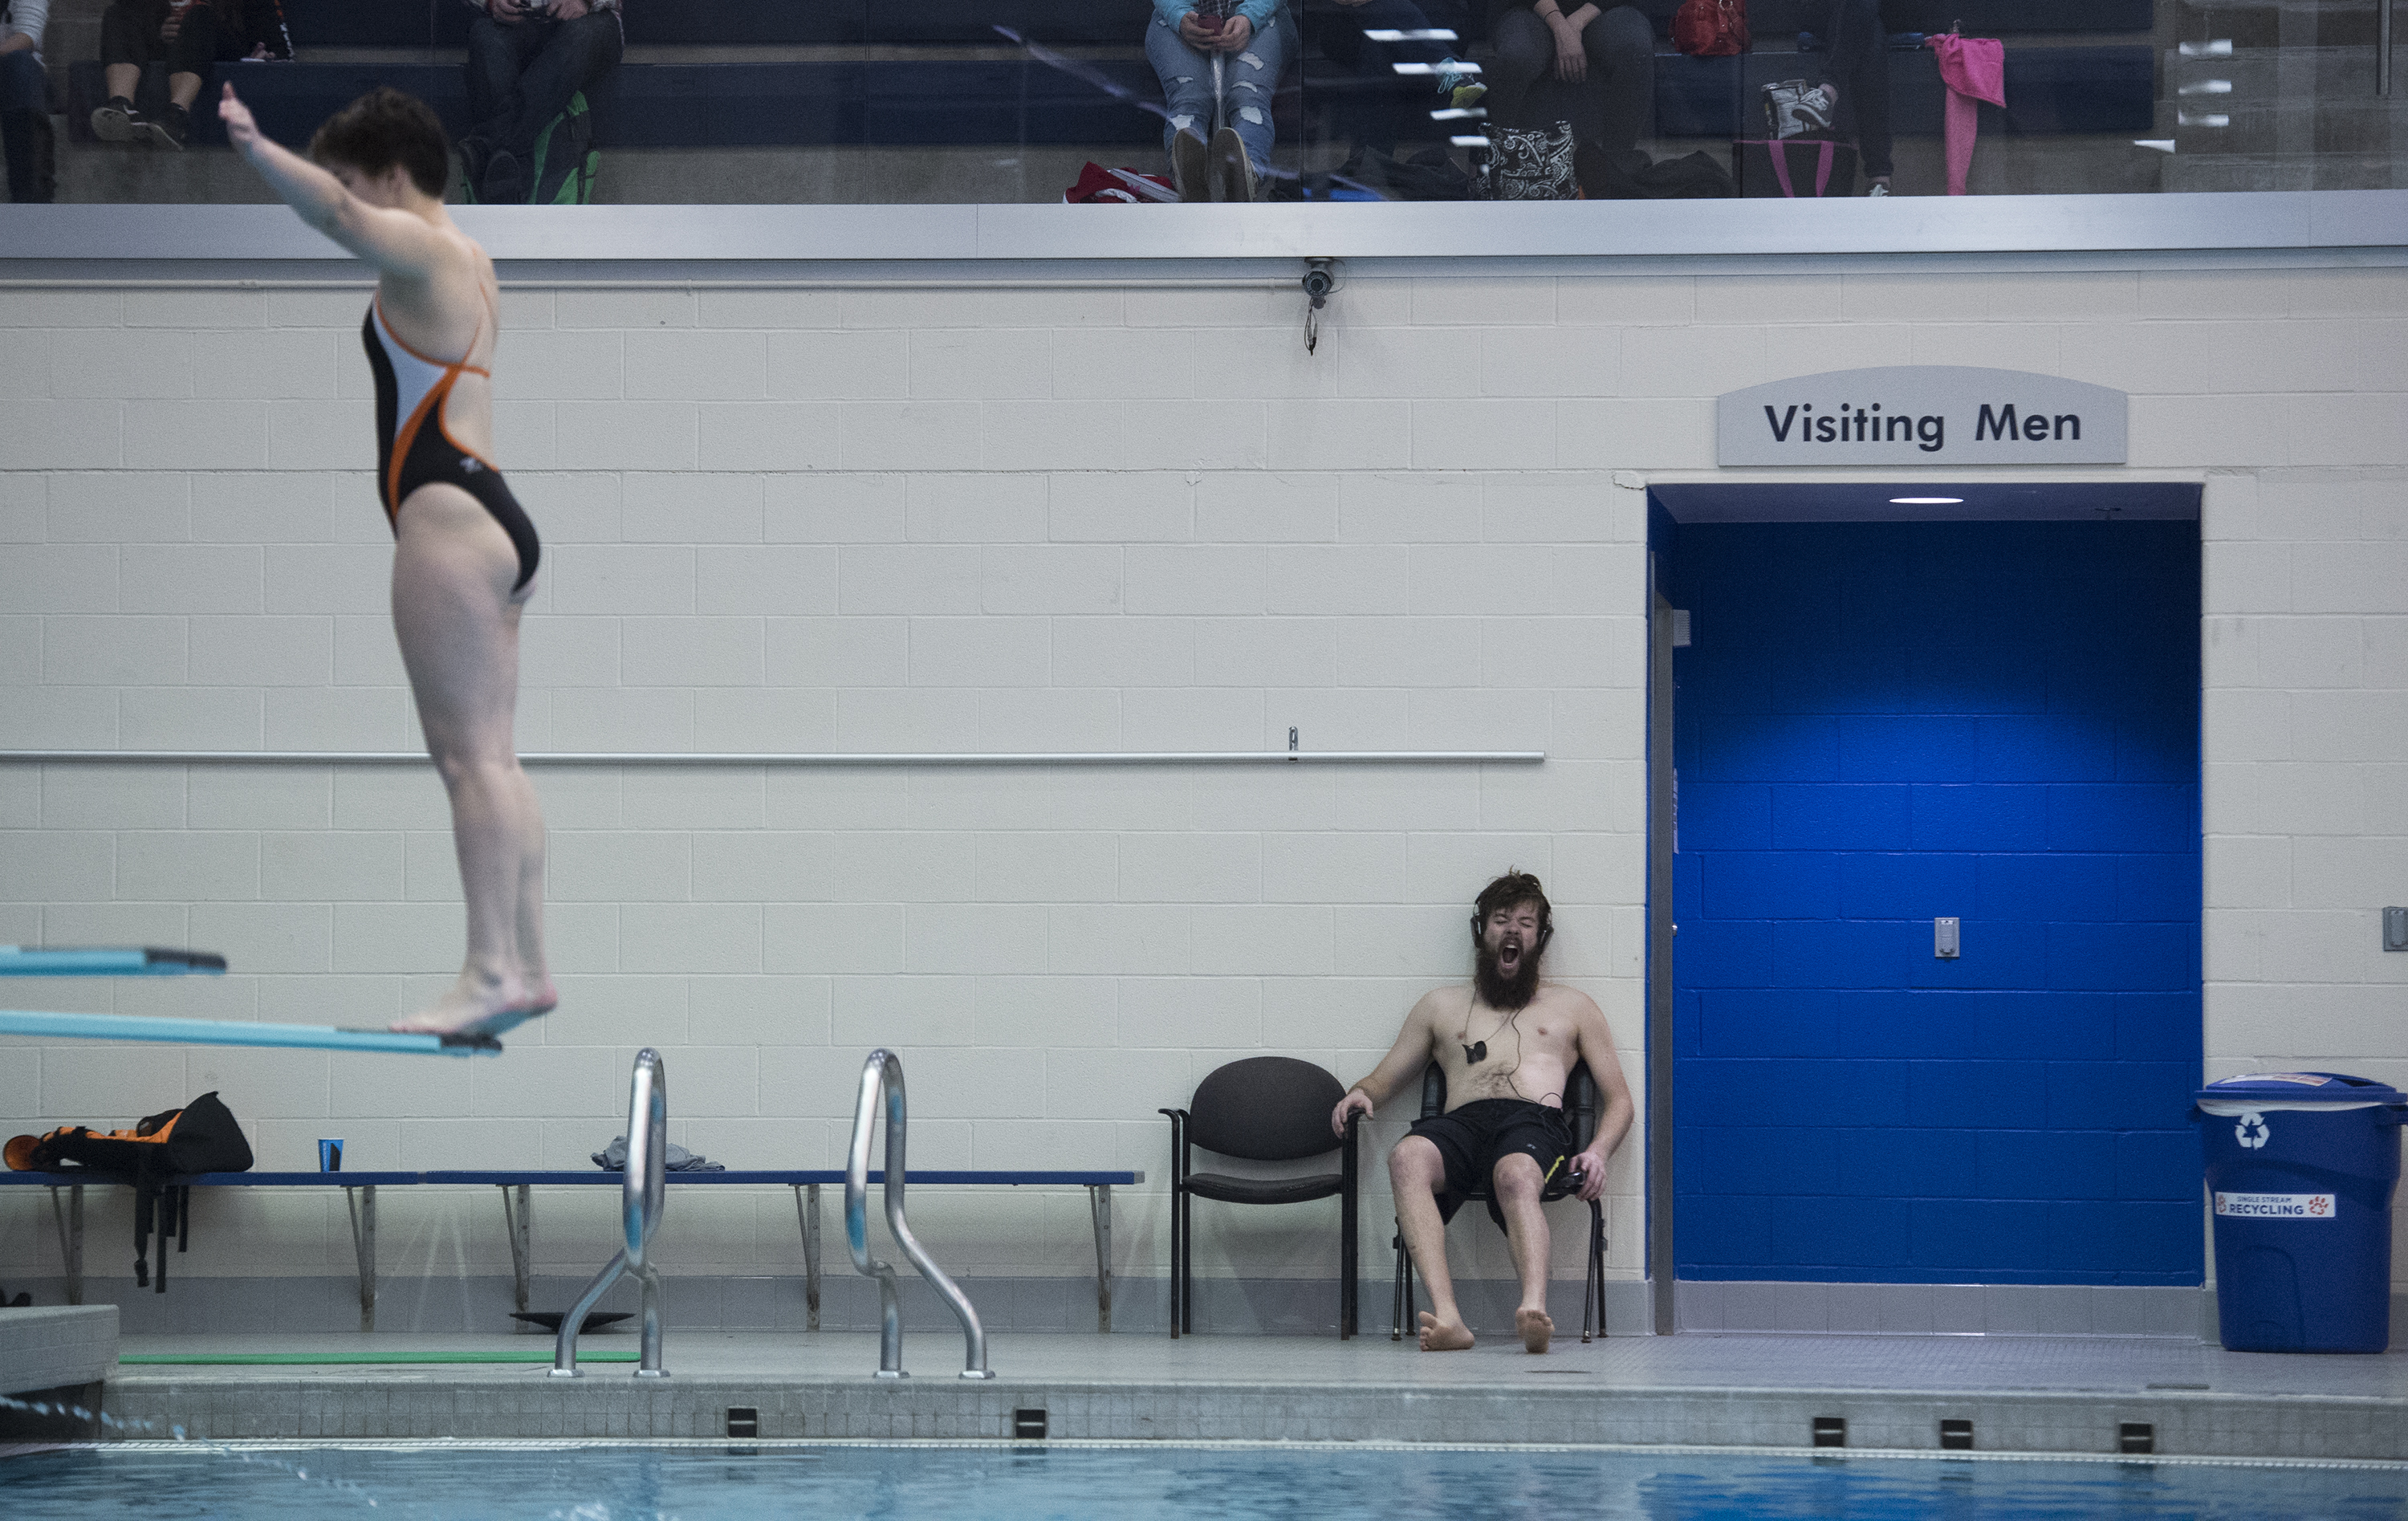 Patrick McFadden, a freshman from Alfred State University, yawns while Madeline Wolters, a Sophomore from Rochester Institute of Technology (RIT), performs a one meter dive at Judson Pool on the RIT Campus, on Nov. 19, 2016, in Henrietta, N.Y. RIT won the meet, with a women's score of 148-96, and a men's score of 186.5-103.